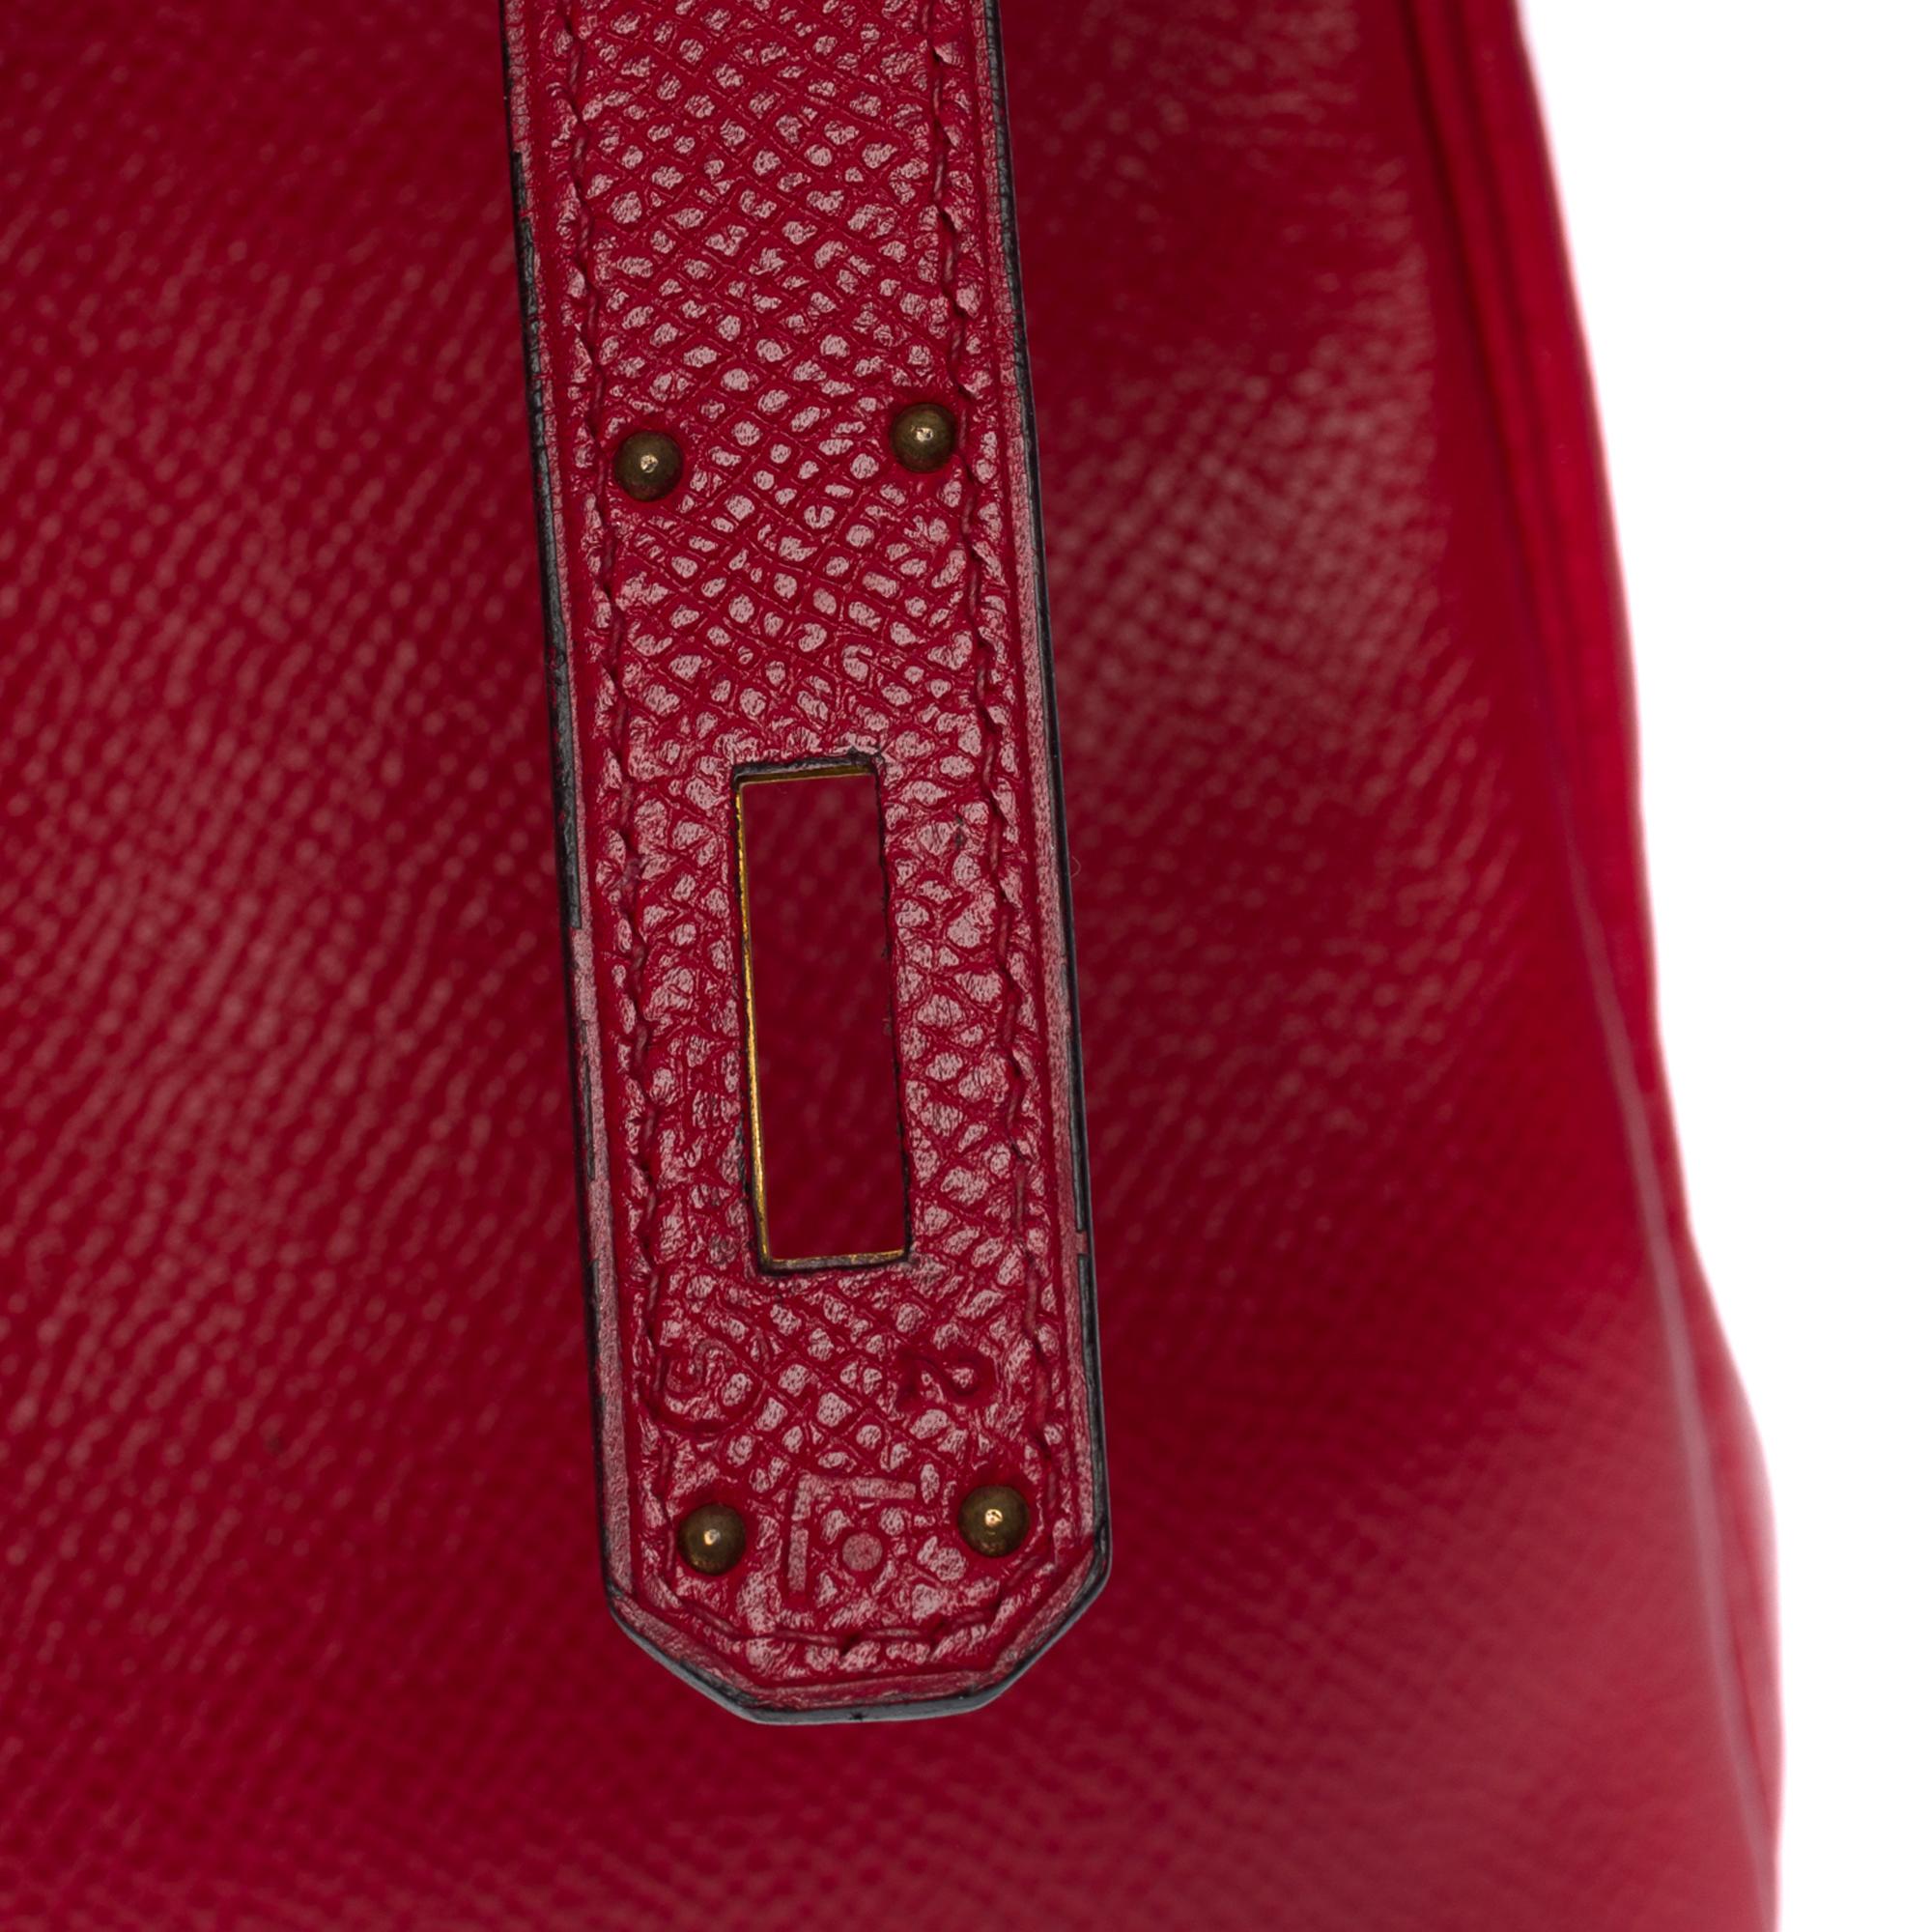 Hermès Kelly 32 retourne handbag strap in Red Courchevel leather, GHW For Sale 2